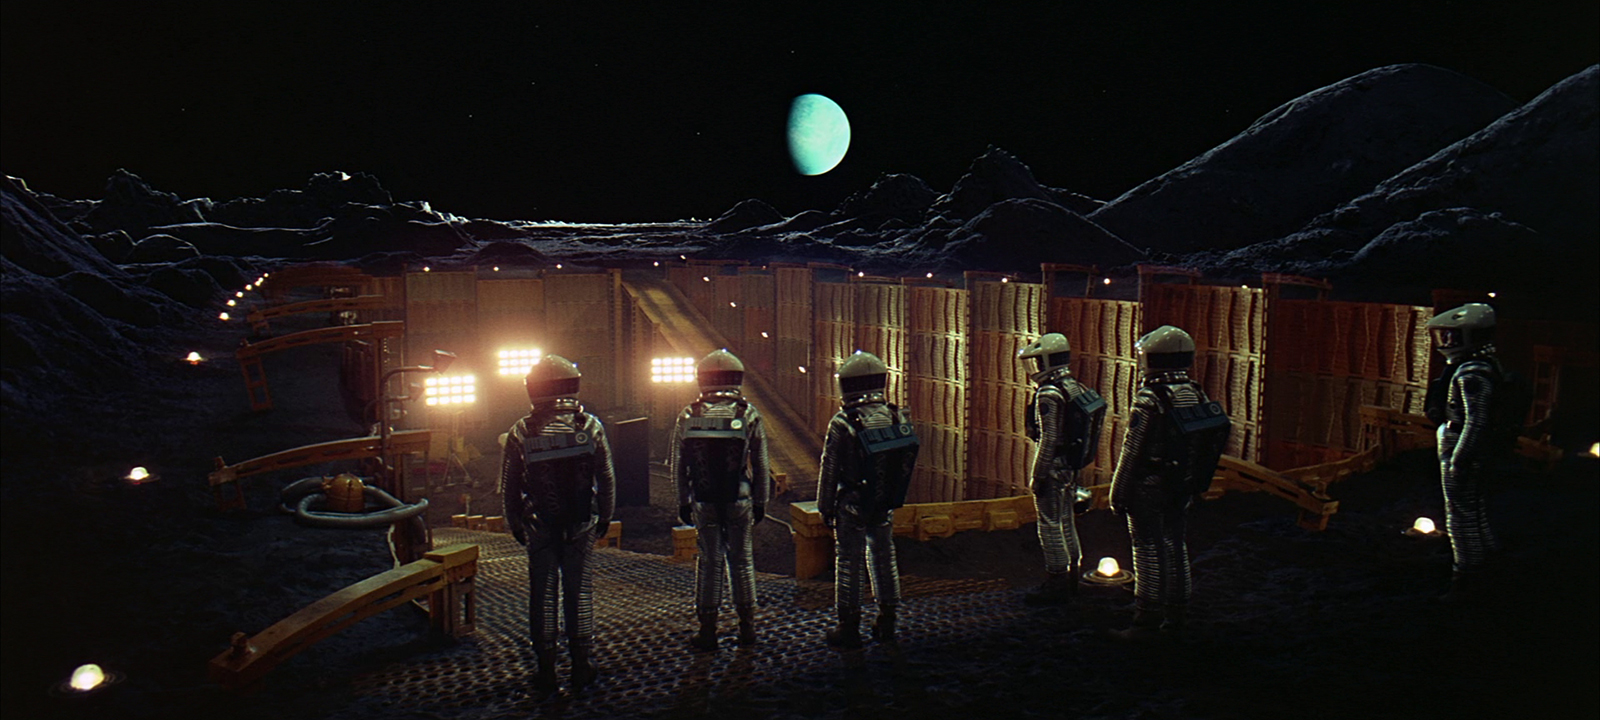 2001 space odyssey moon